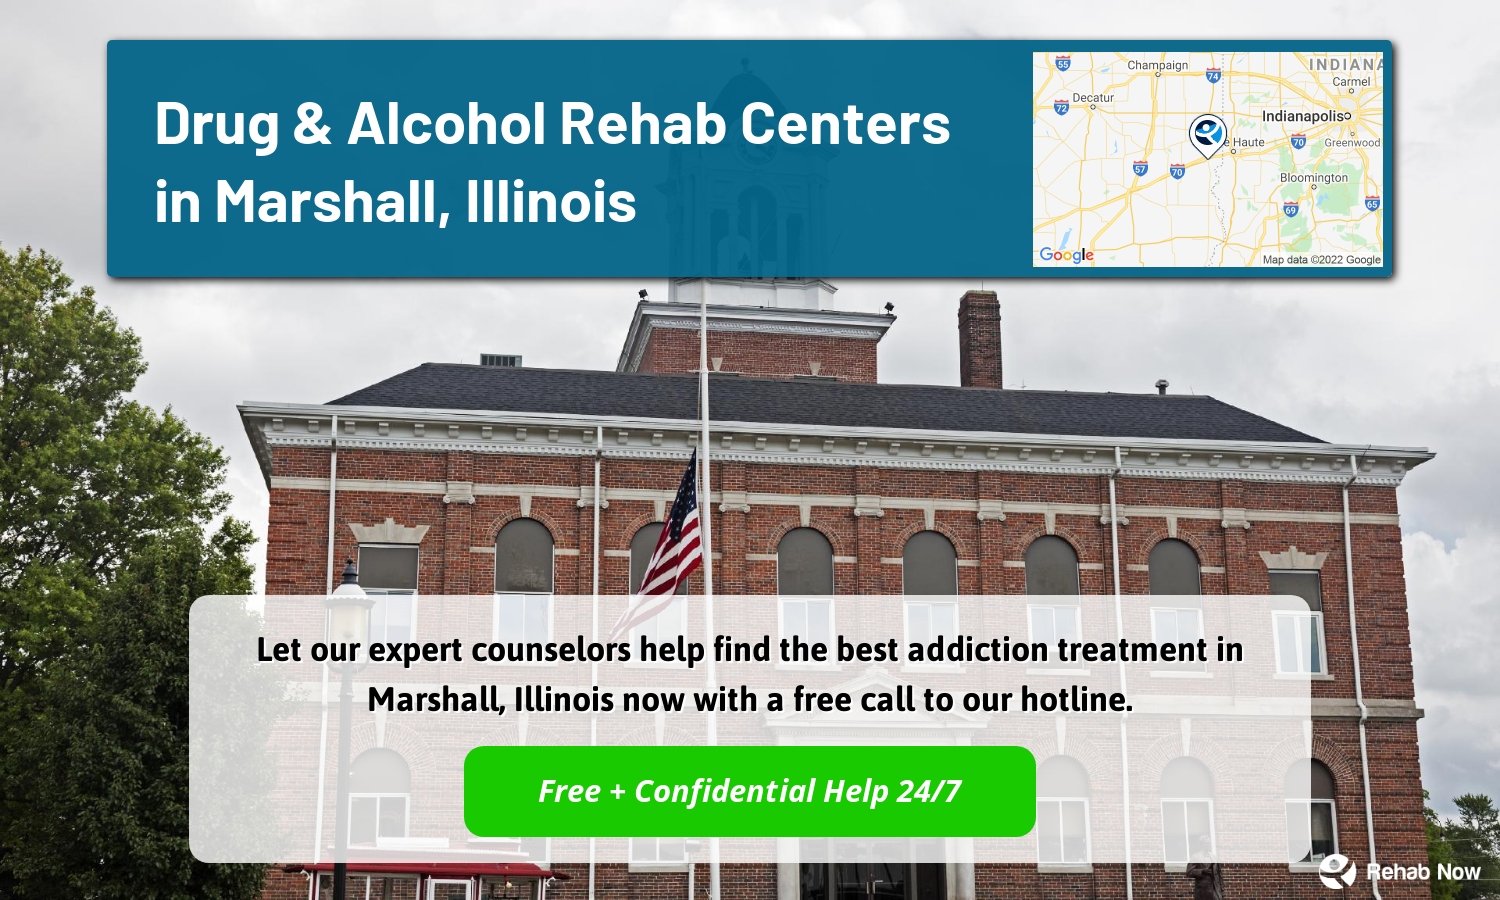 Let our expert counselors help find the best addiction treatment in Marshall, Illinois now with a free call to our hotline.